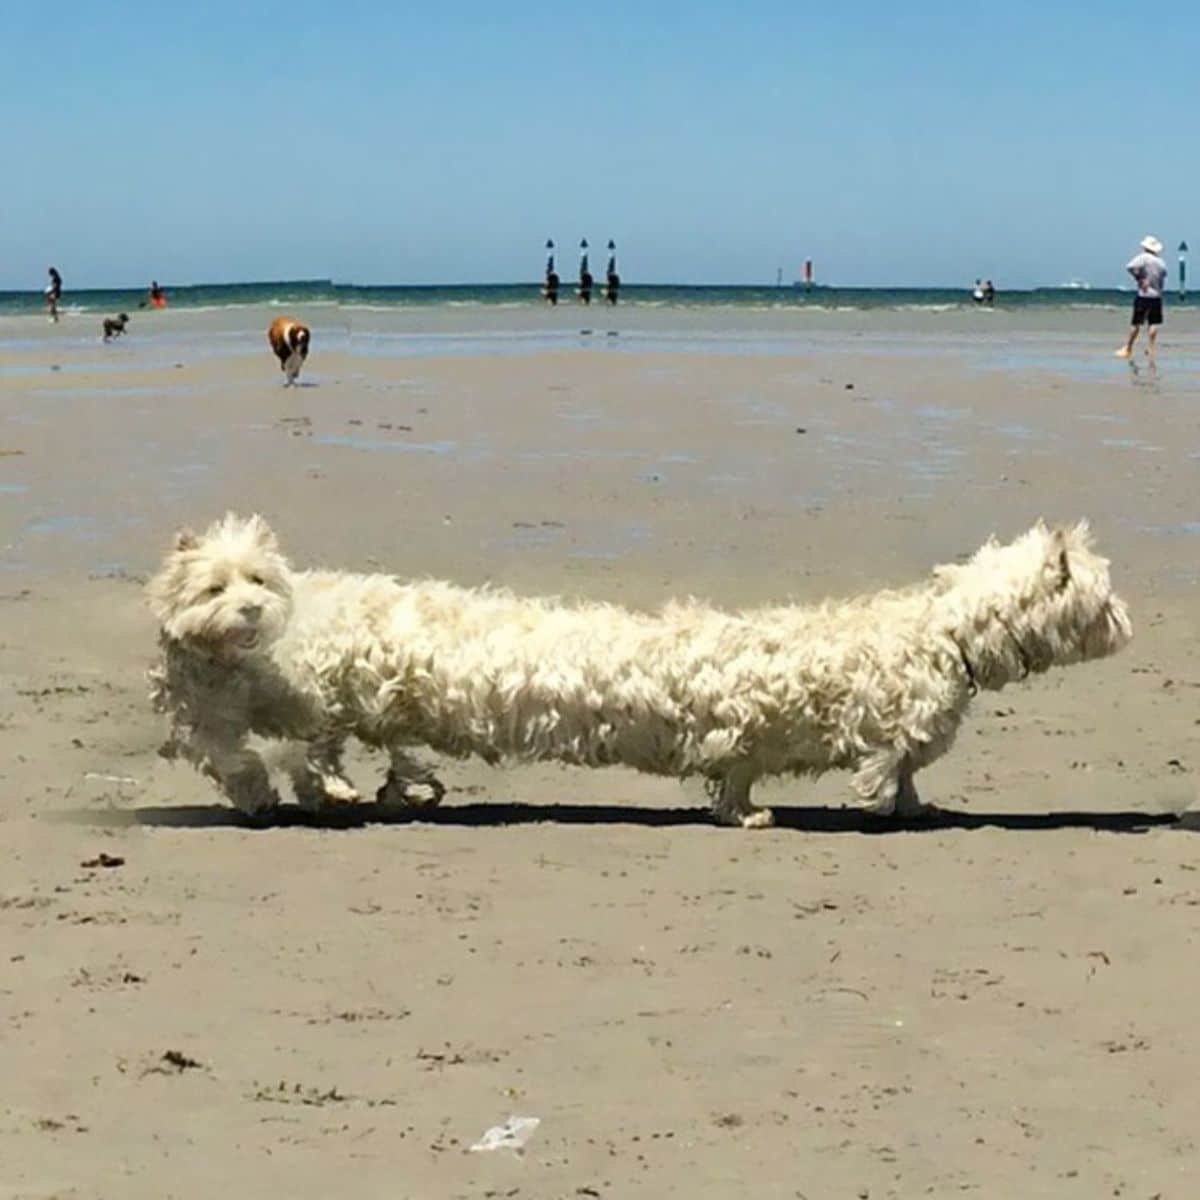 panoramic fail of fluffy white dog on beach with 2 heads at either end 5 legs